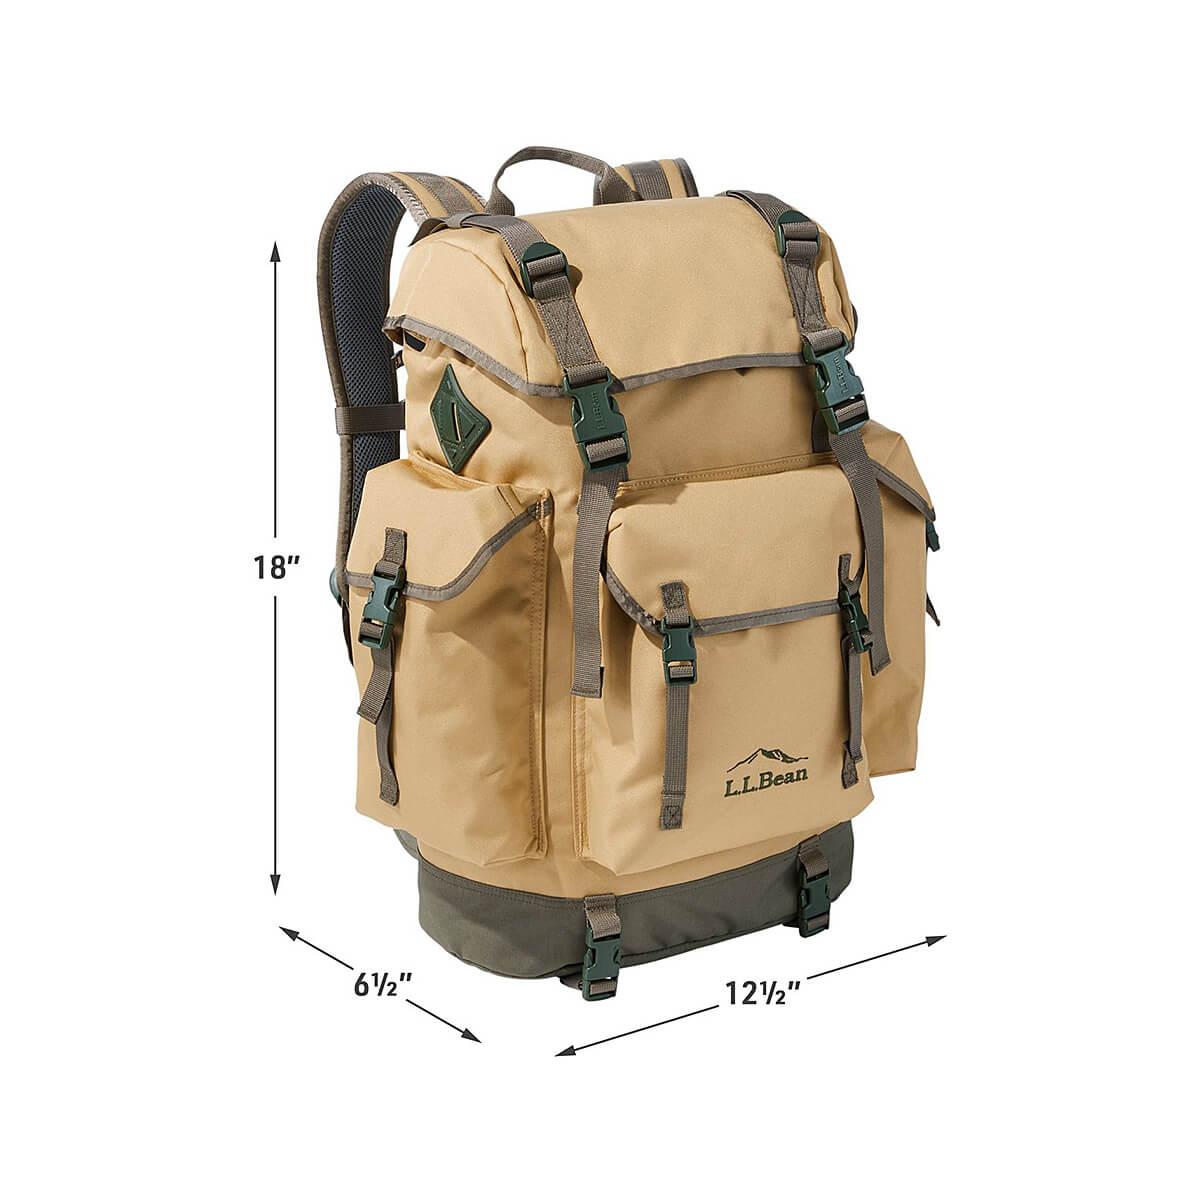  L.L.BEAN - Continental S Rucksack - Camouflage Green Backpack :  Sports & Outdoors